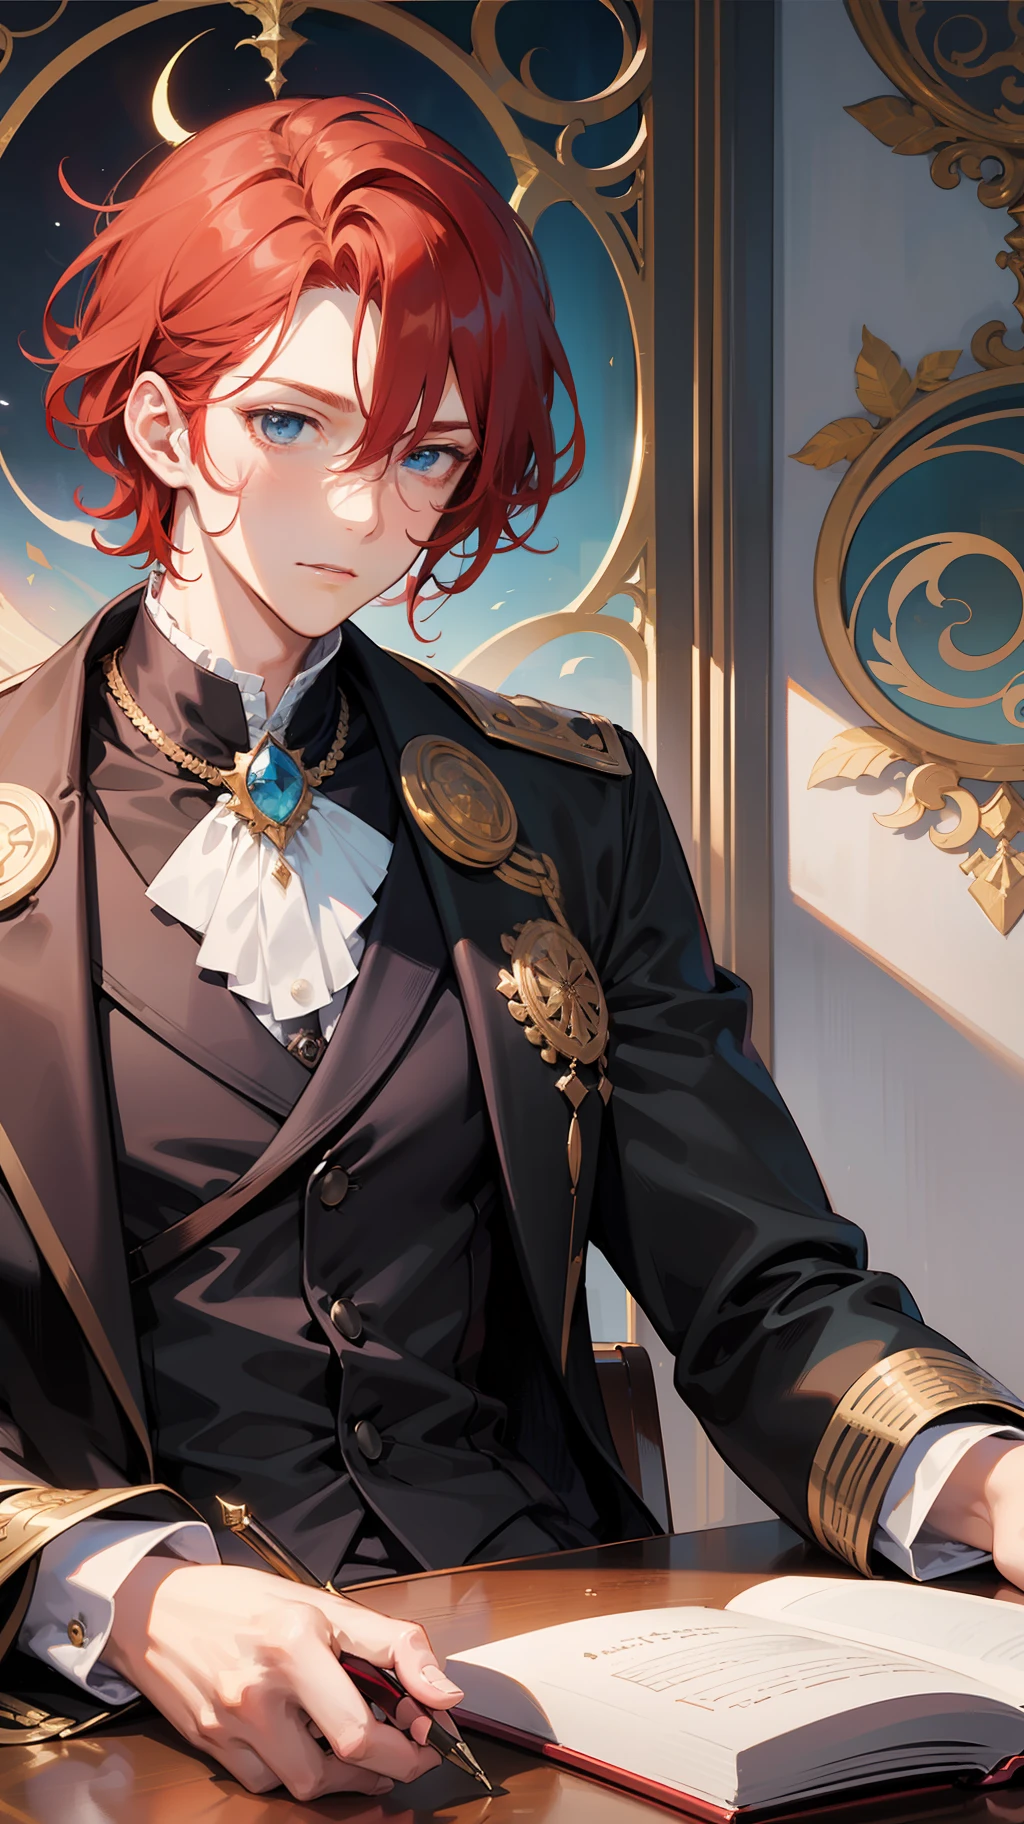 (1 man), (young red haired man), (short wavy hairstyle), wearing black regal outfit, sitting on the round table, looking at the camera, handsome young man, nobelish look, masterpiece artwork, light novel cover art illustration, soft sun lighting